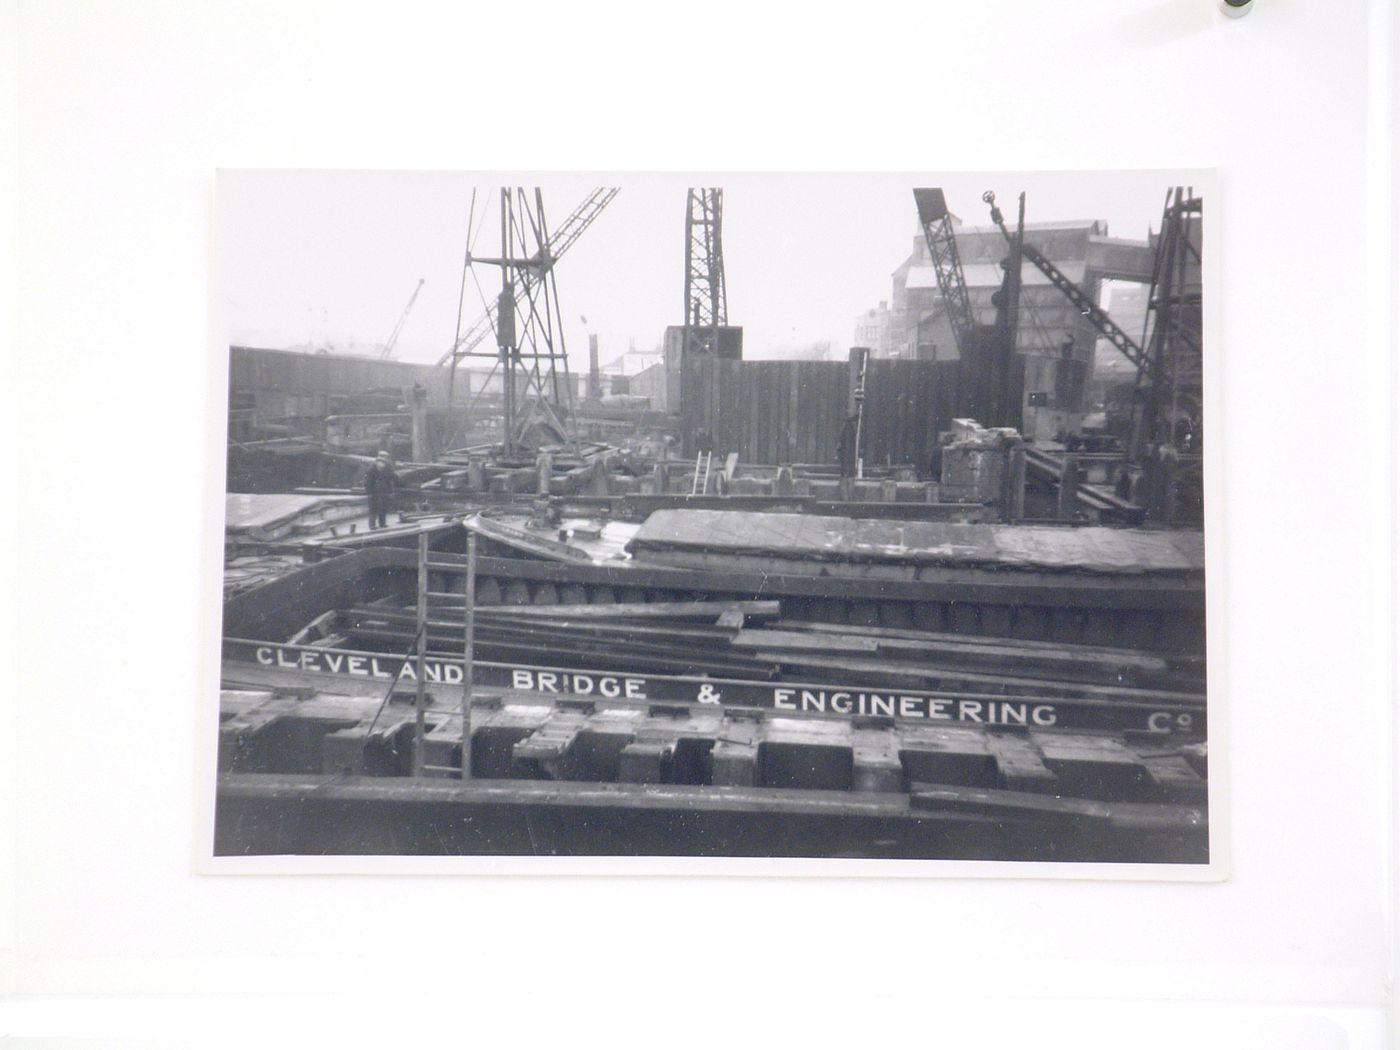 View of construction of a dock by the Cleveland Bridge and Engineering company